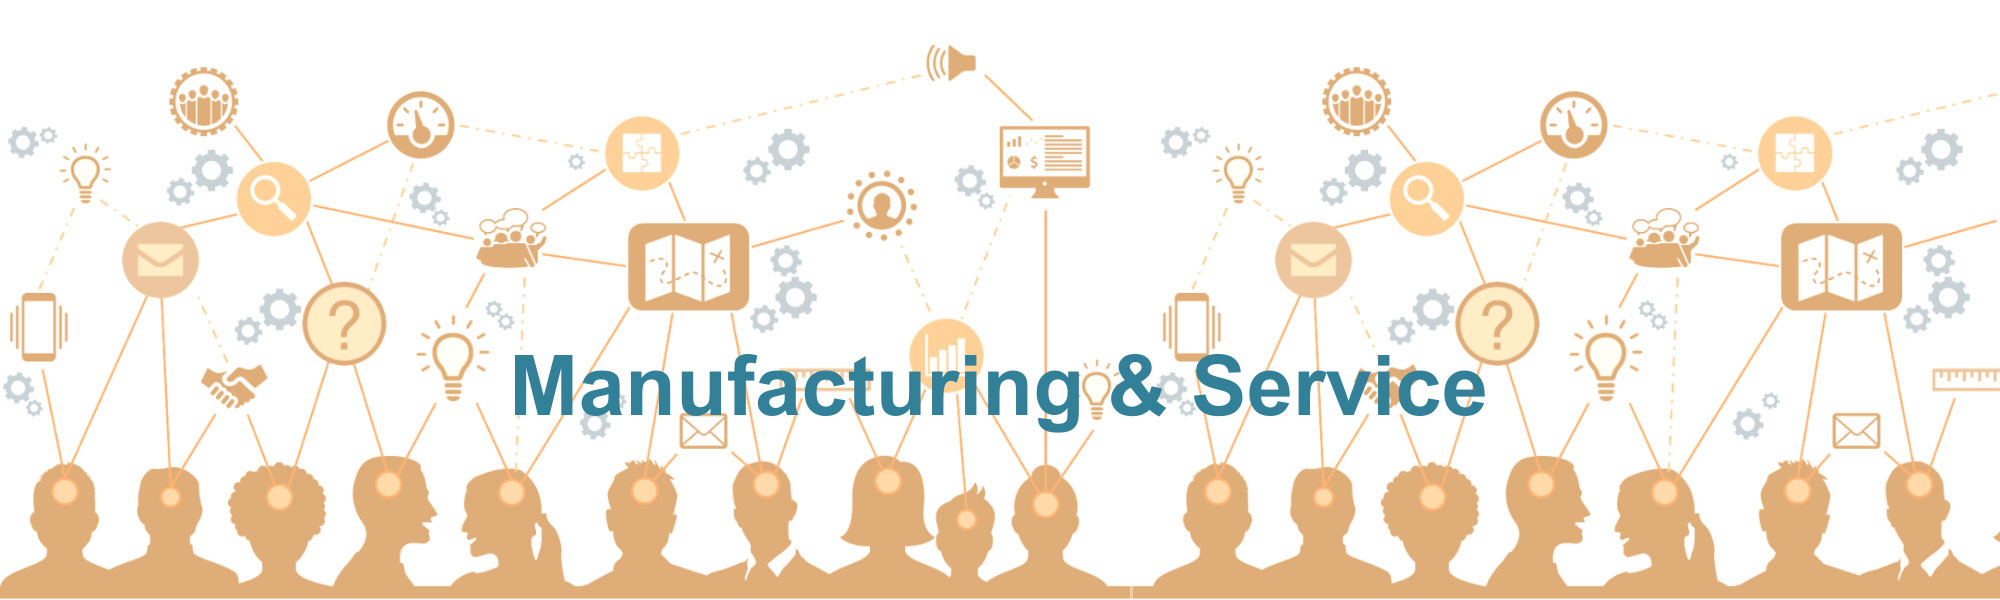 manufacturing-services image